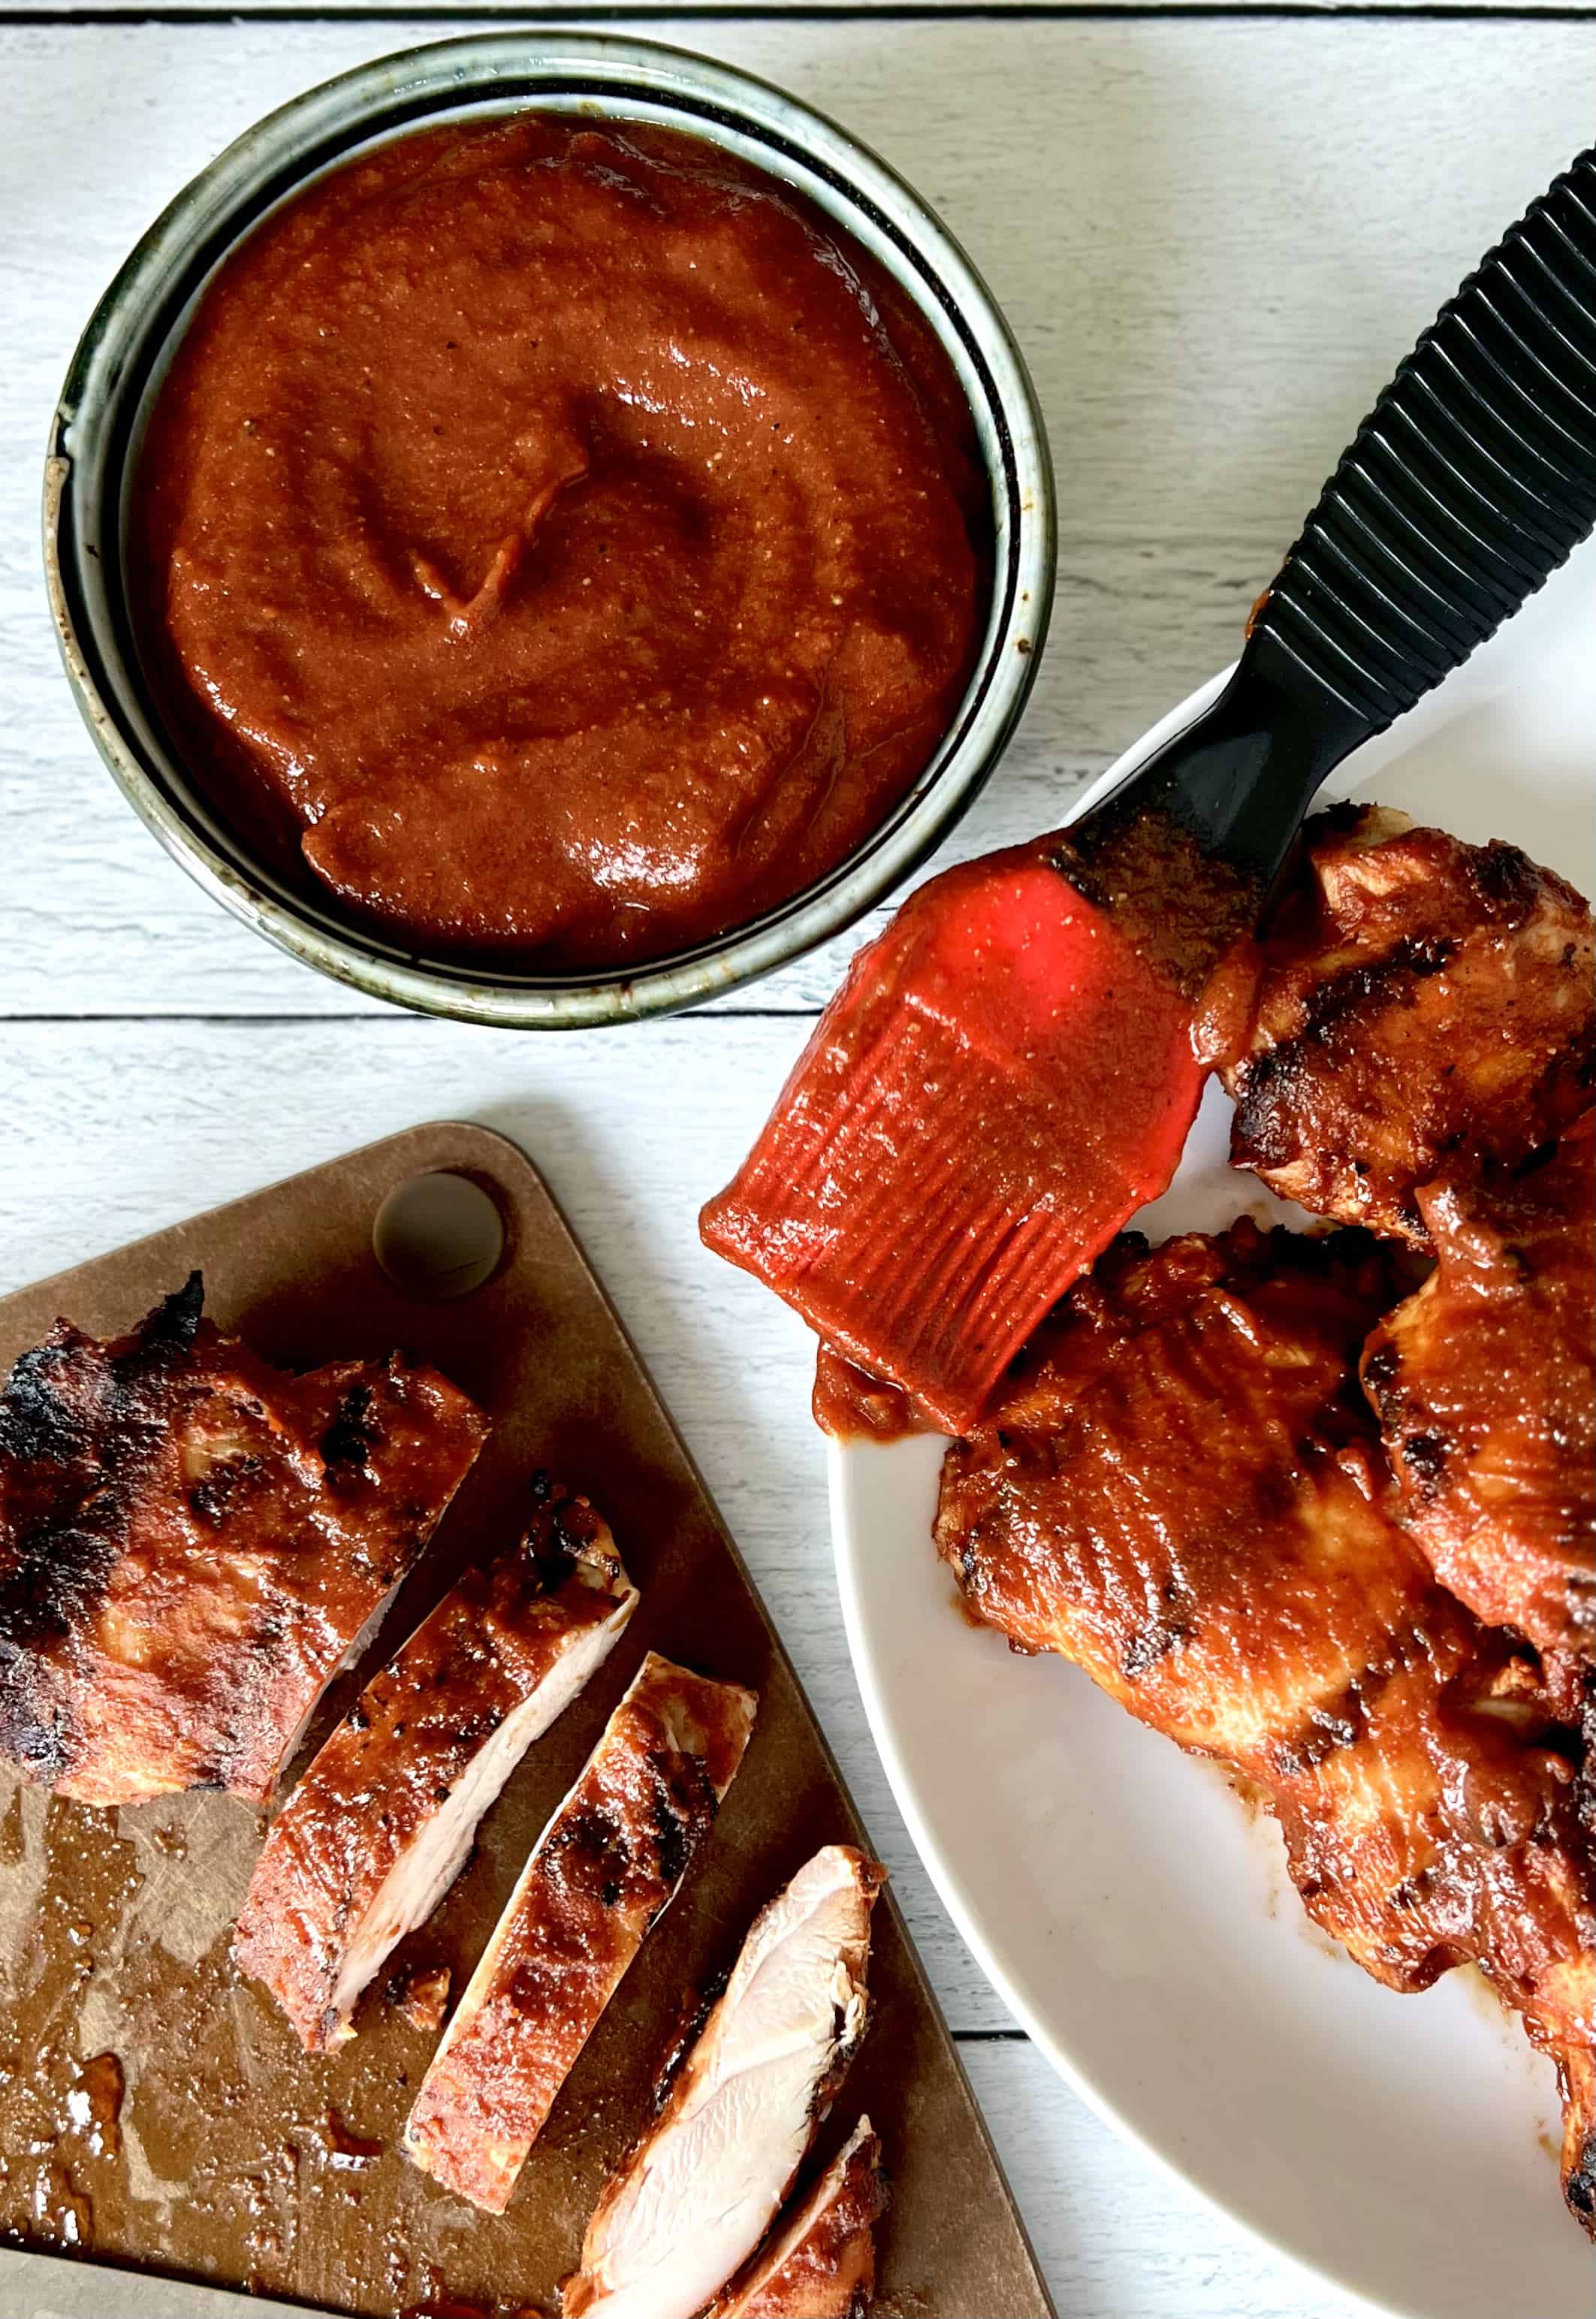 Healthy BBQ sauce in a bowl next to a basting brush coated in the sauce resting on the rim of a white plate with BBQ chicken on it and a cutting board with sliced BBQ chicken on it.